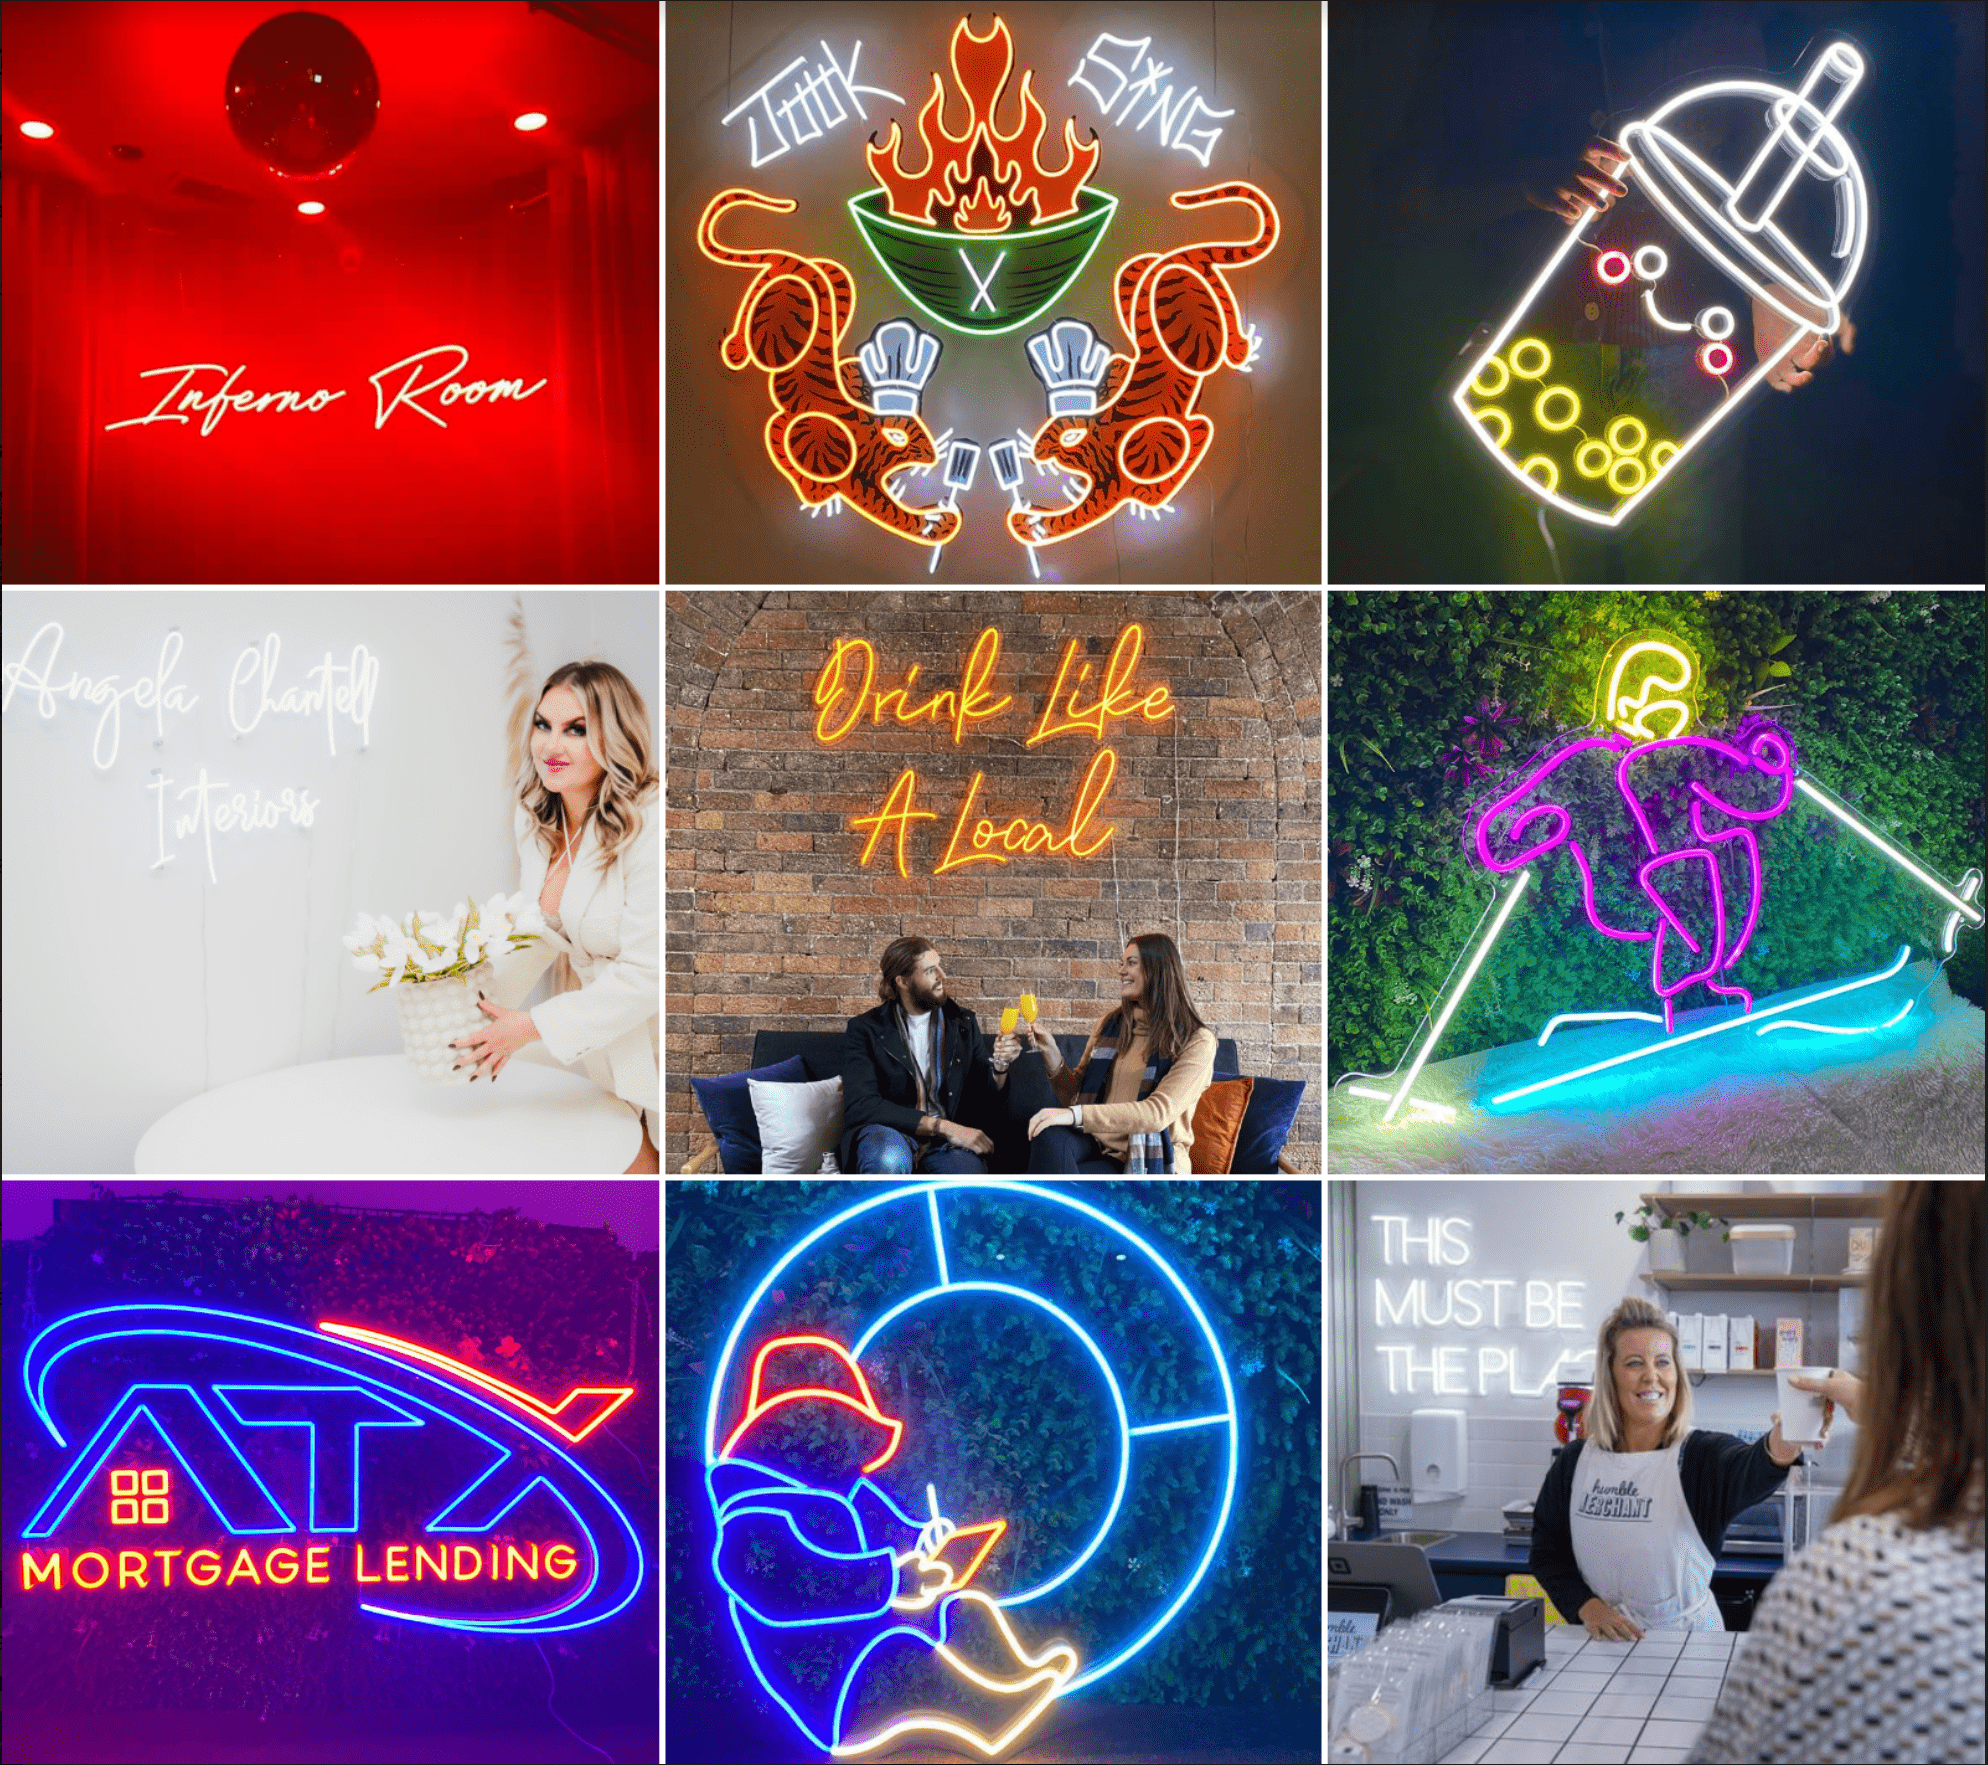 Custom Logo LED Neon Signs  Customize With Your Logo Business Sign